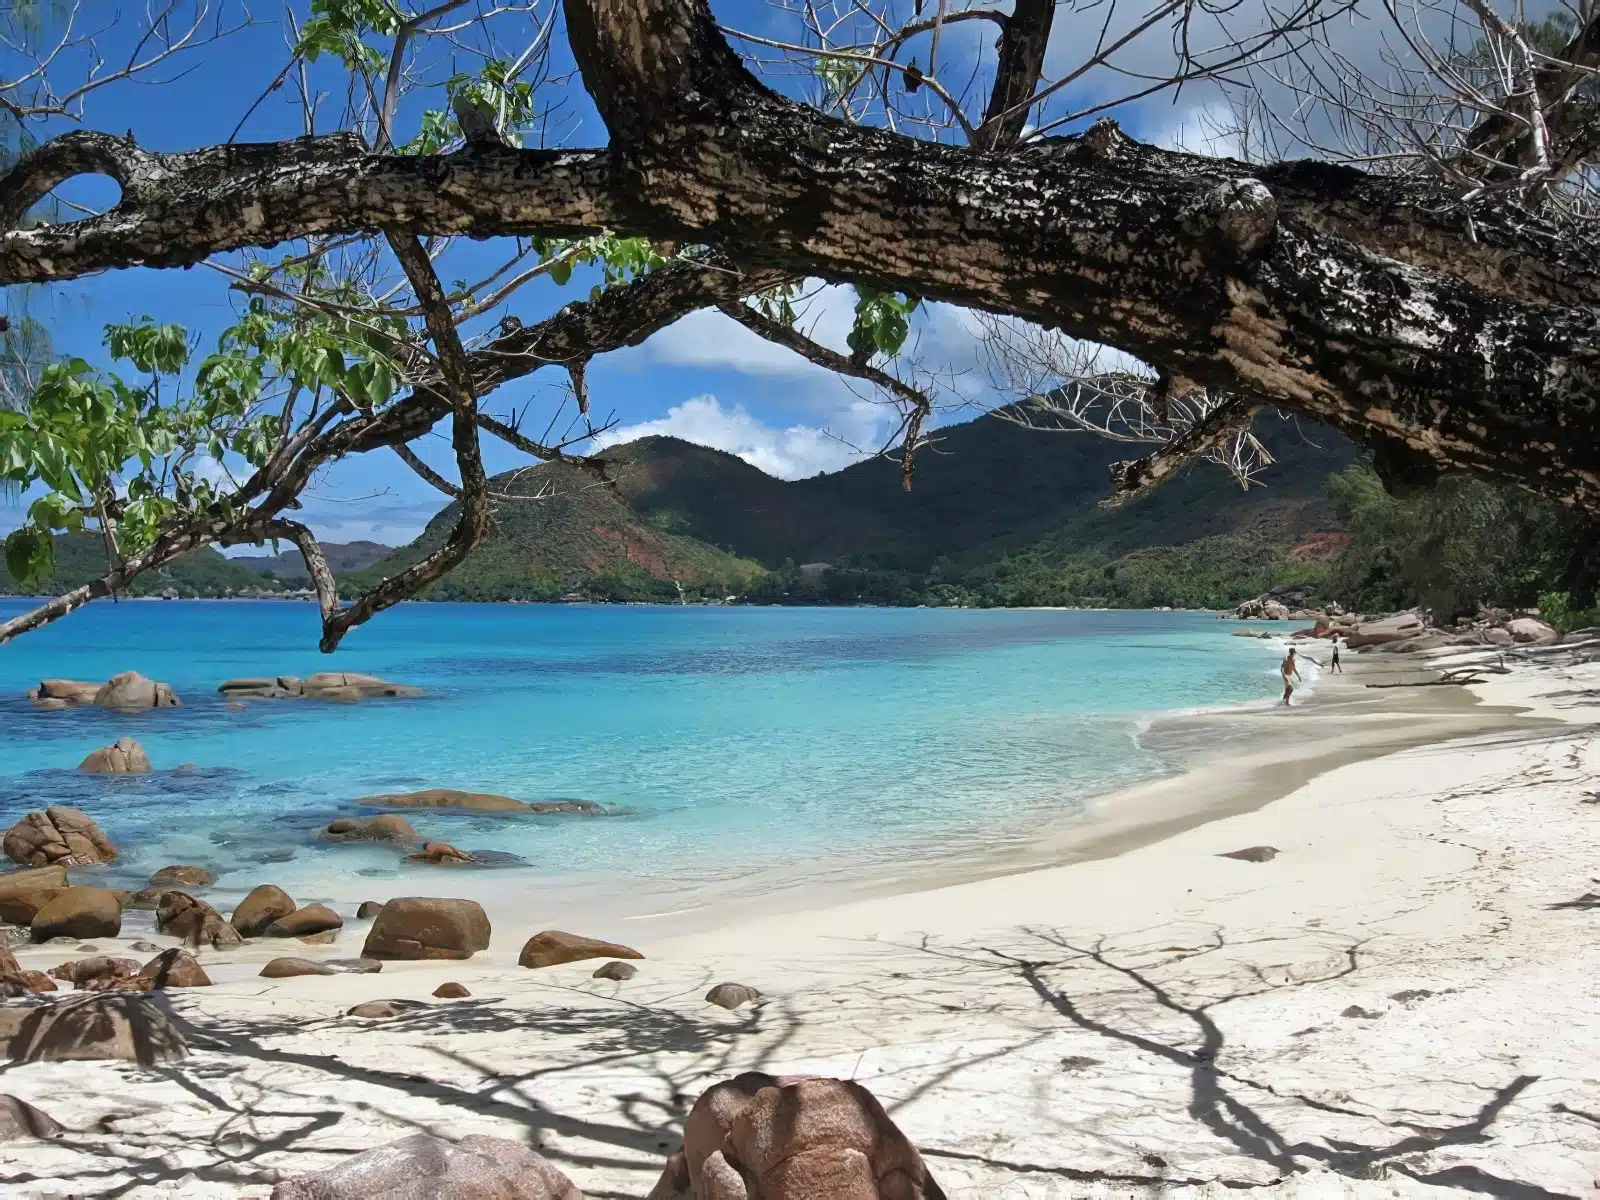 Discover the 10 most beautiful places to visit in the Seychelles